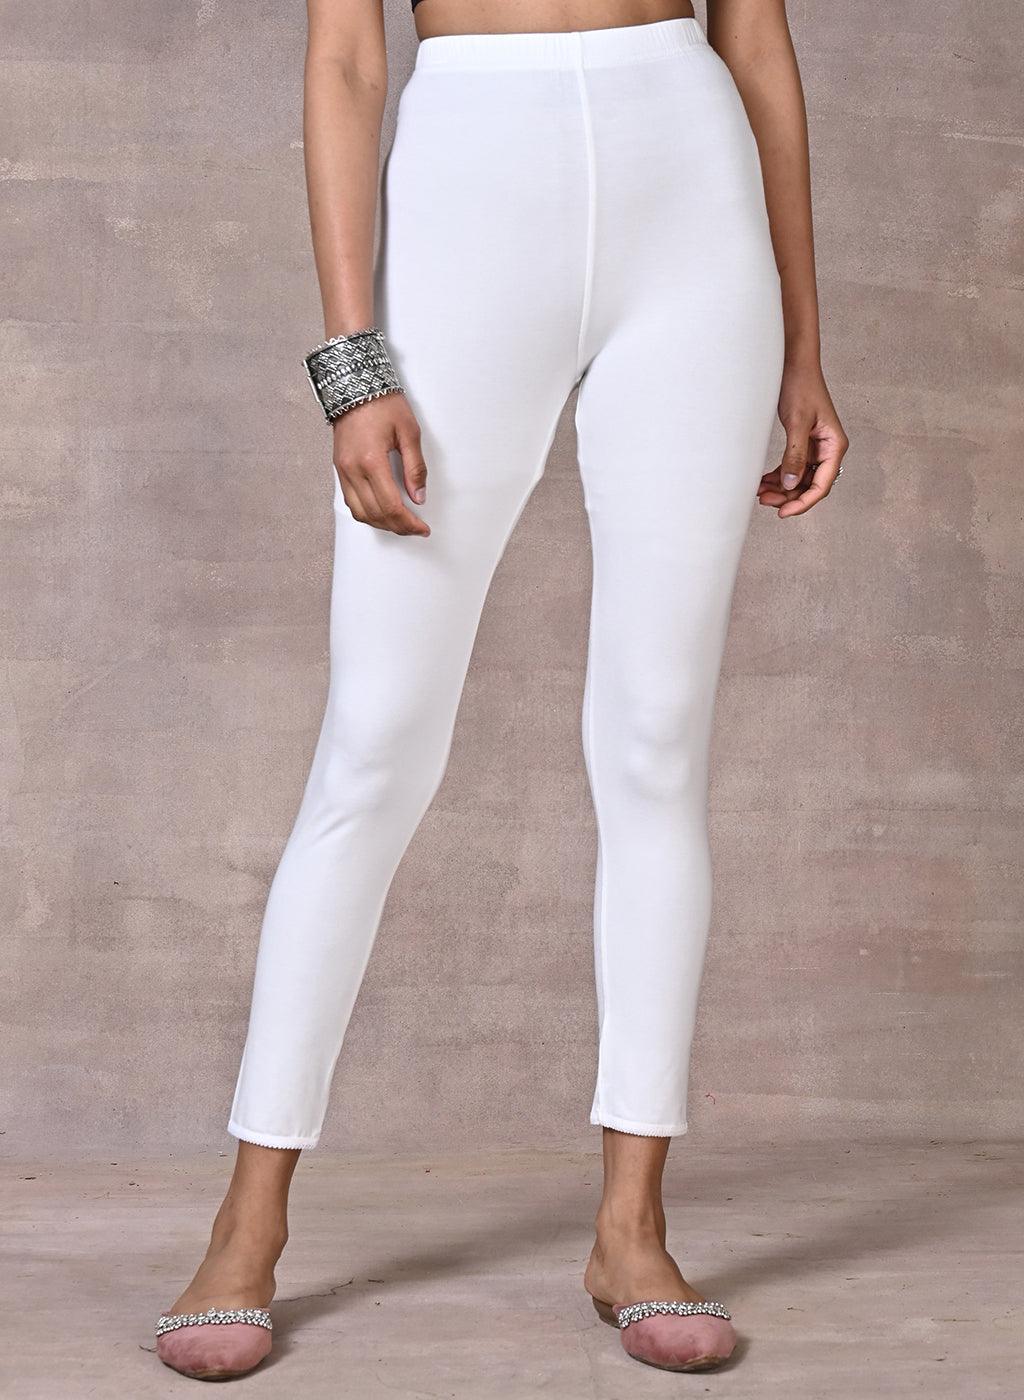 Cotton Skin Ankle Length Leggings, Size : Small, Medium, Large, Length : 20  Inch at Best Price in Mumbai